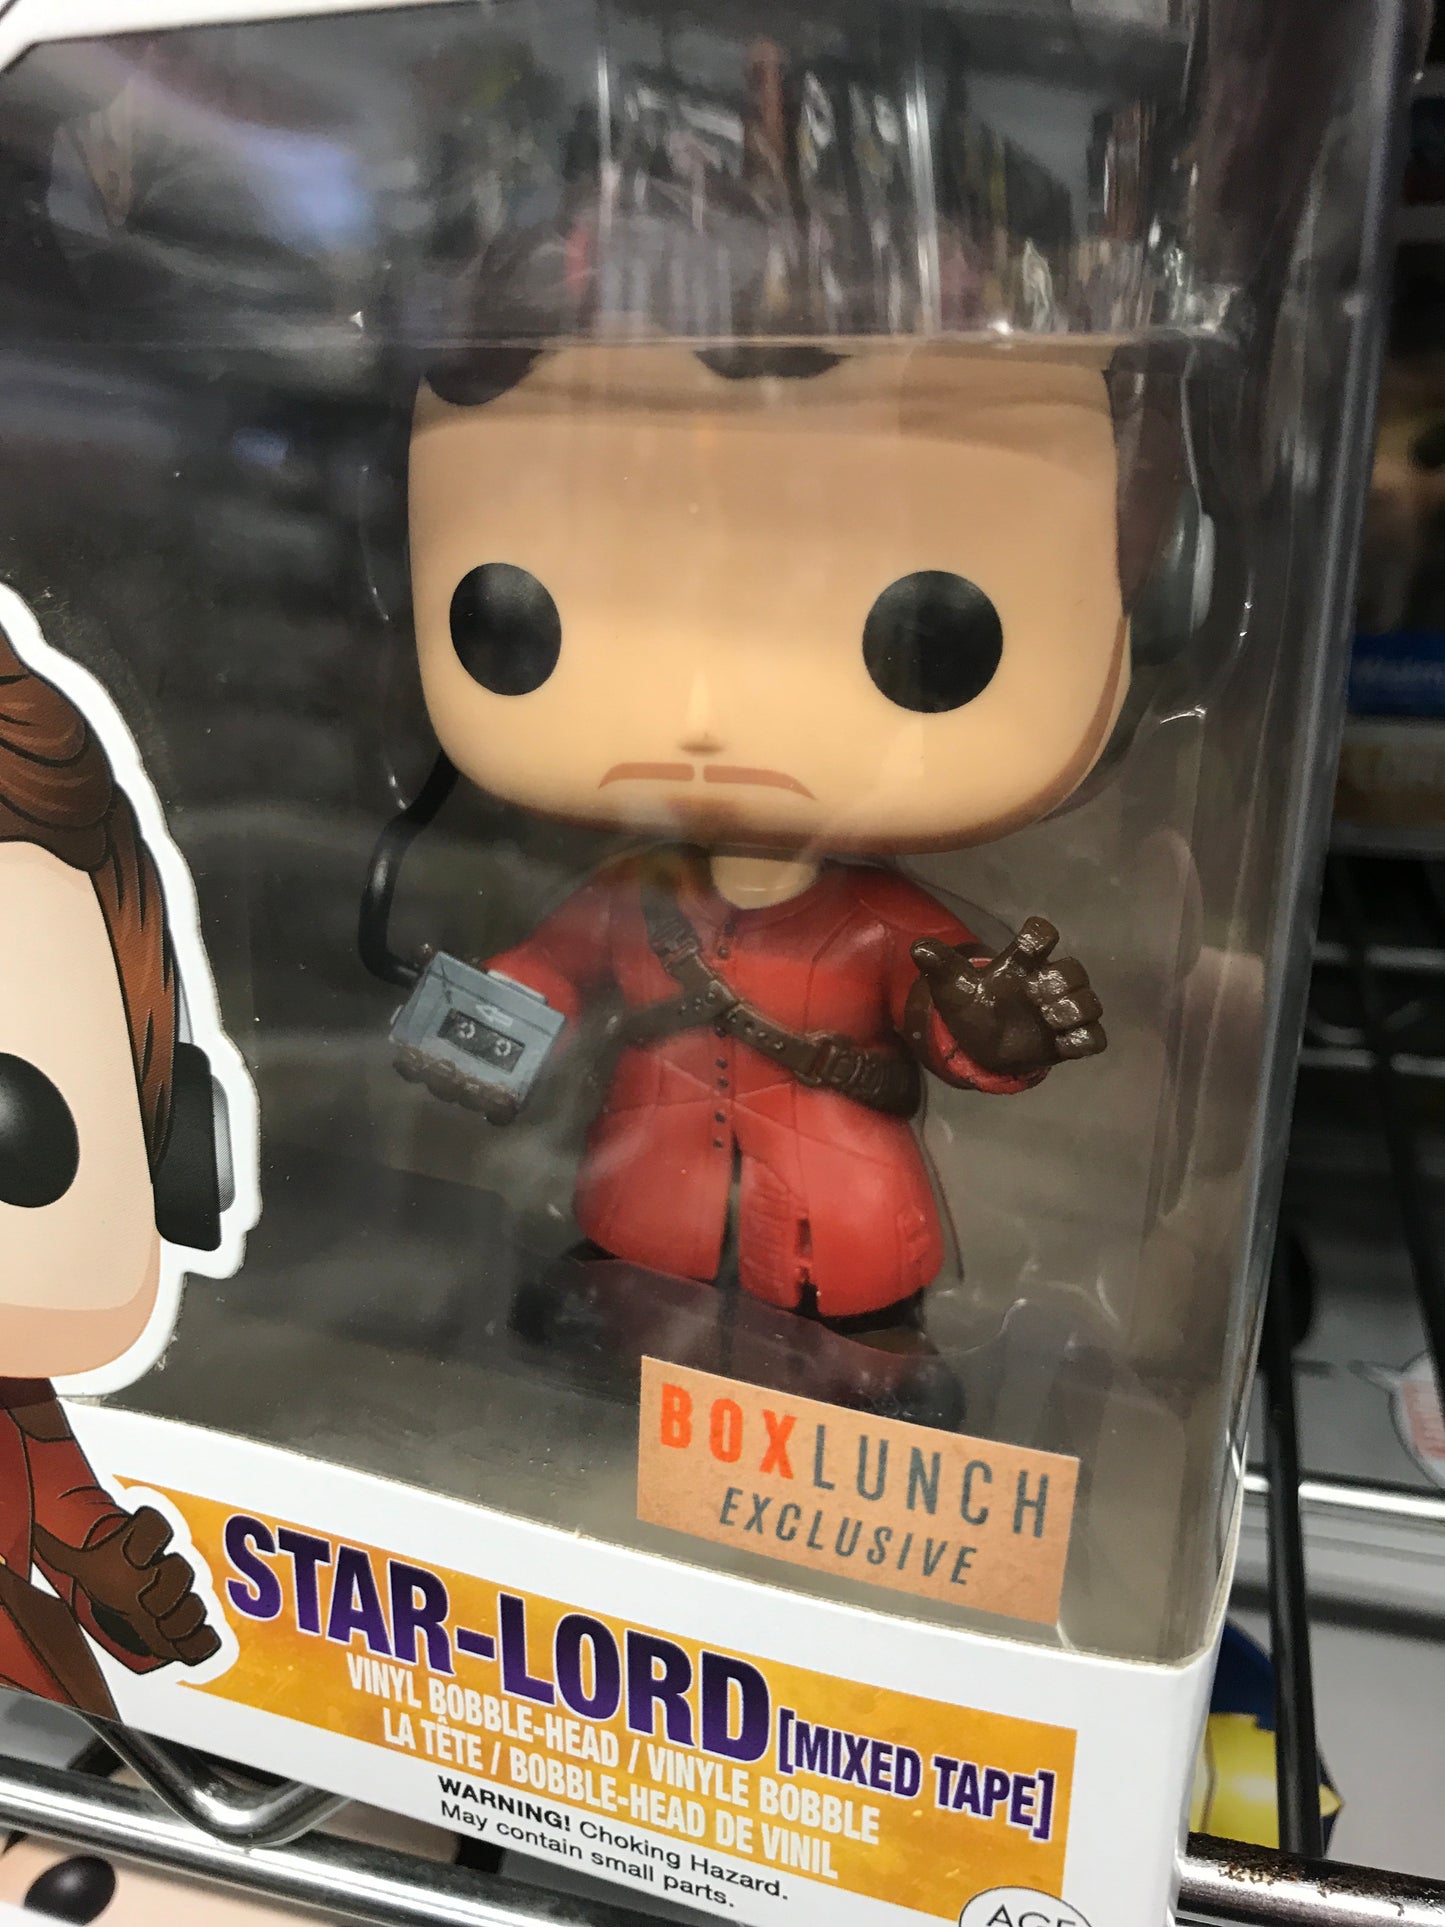 Guardians of the Galaxy Star Lord mixed tape Exclusive Funko Pop! Vinyl figure